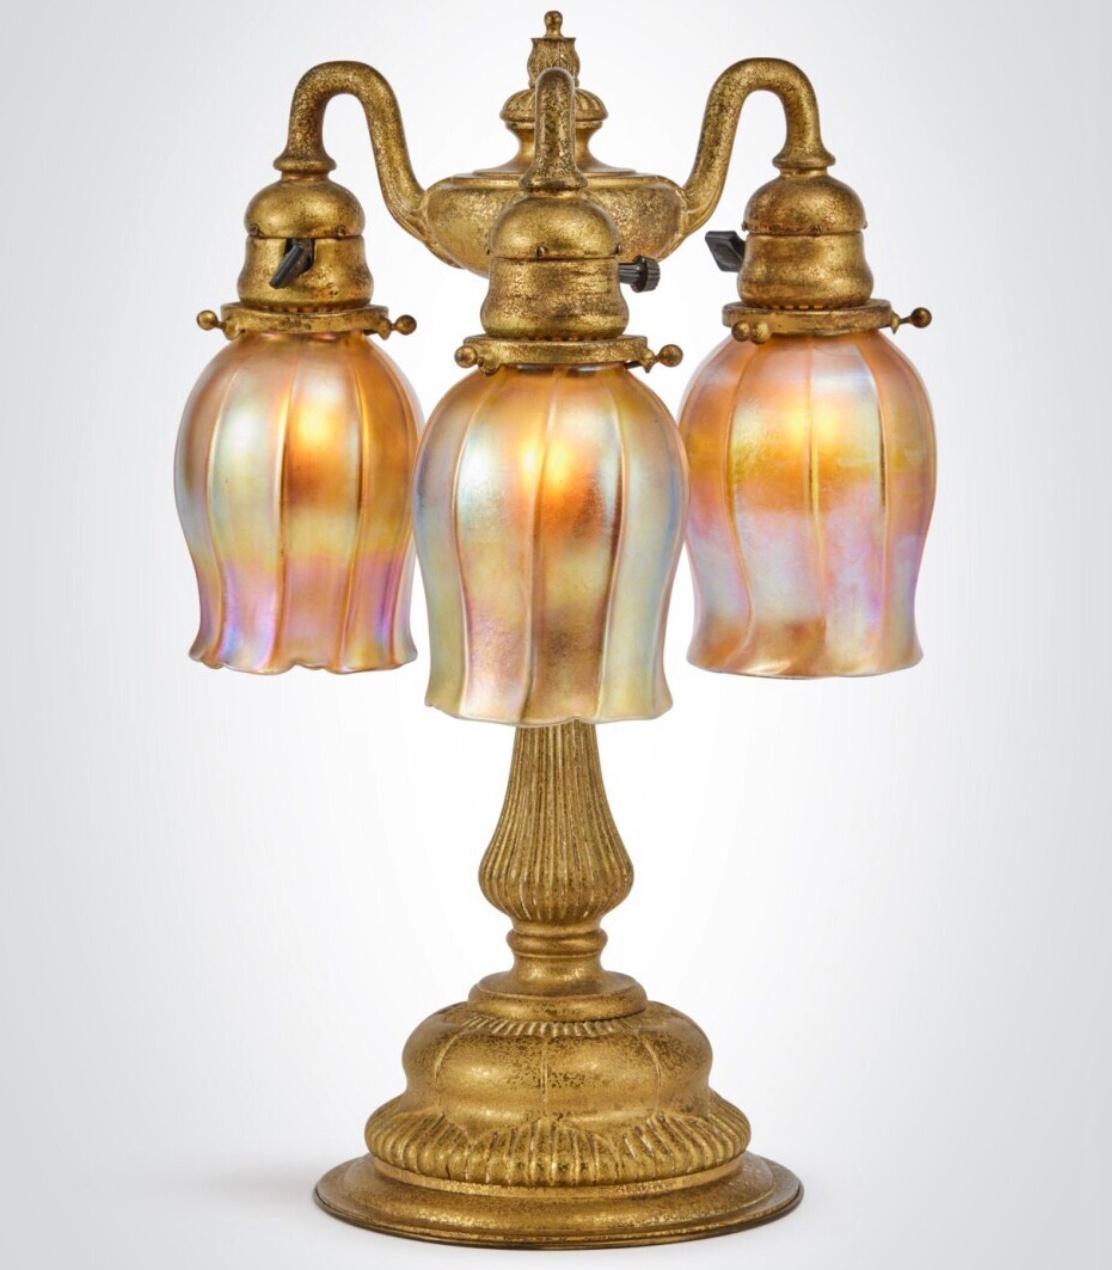 Tiffany Studios Three-Light Table Lamp
circa 1910
favrile glass shades, Three arm gilt bronze base
Shades engraved “L.C.T. Favrile”
Base impressed “TIFFANY STUDIOS/NEW YORK/309”
Height: 16.5 Inches (41.9 cm) 
Width: 11 Inches

Condition: